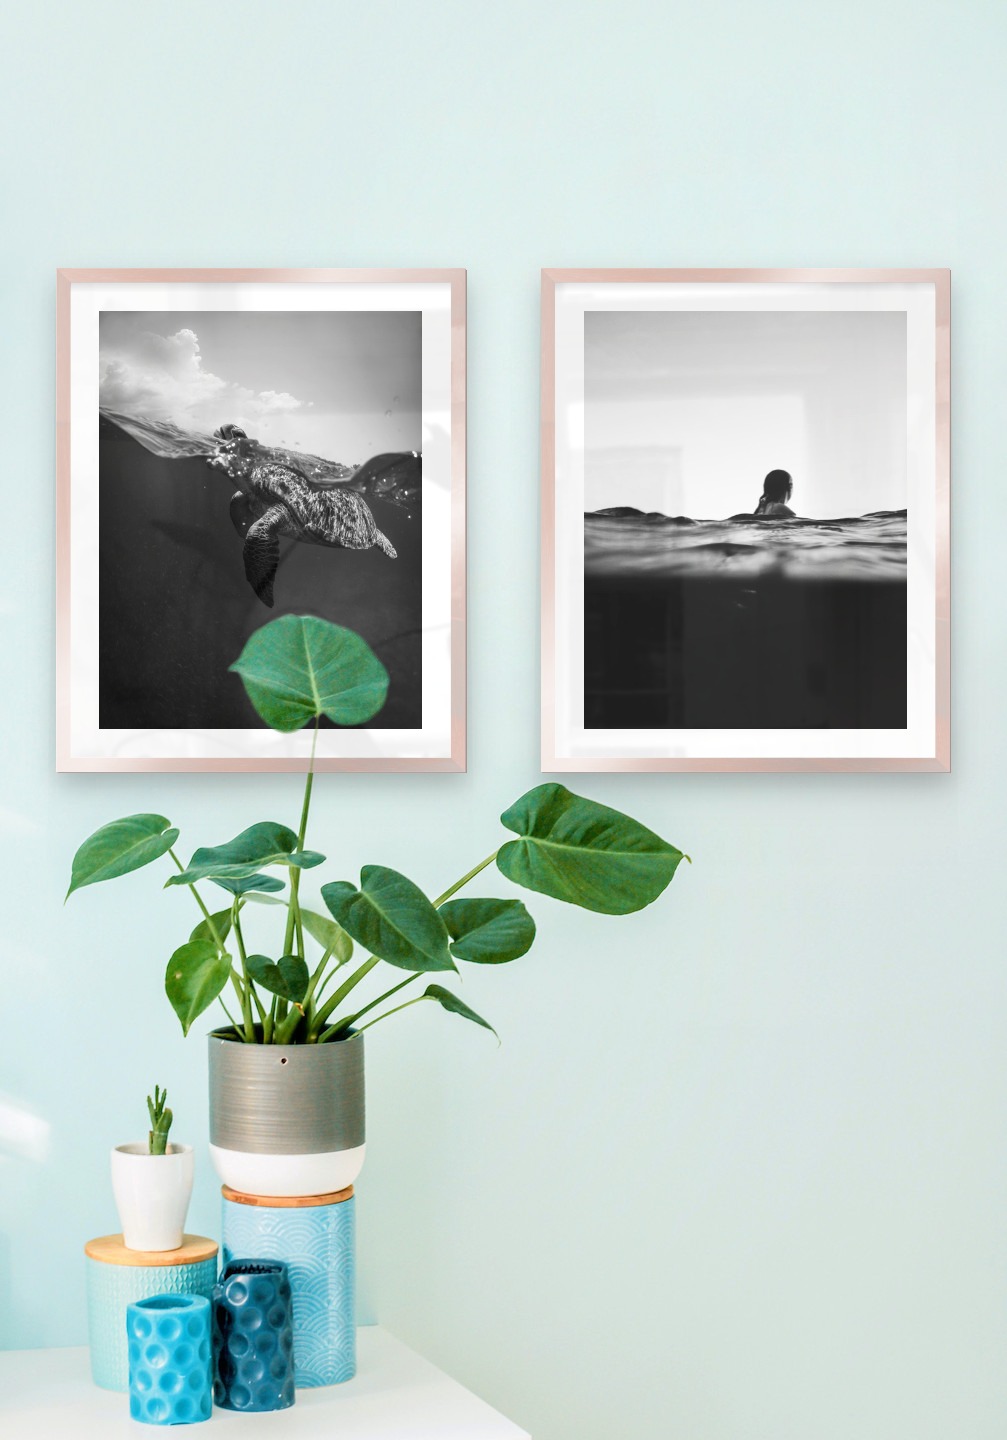 Gallery wall with picture frames in copper in sizes 40x50 with prints "Turtle" and "Person in the water"